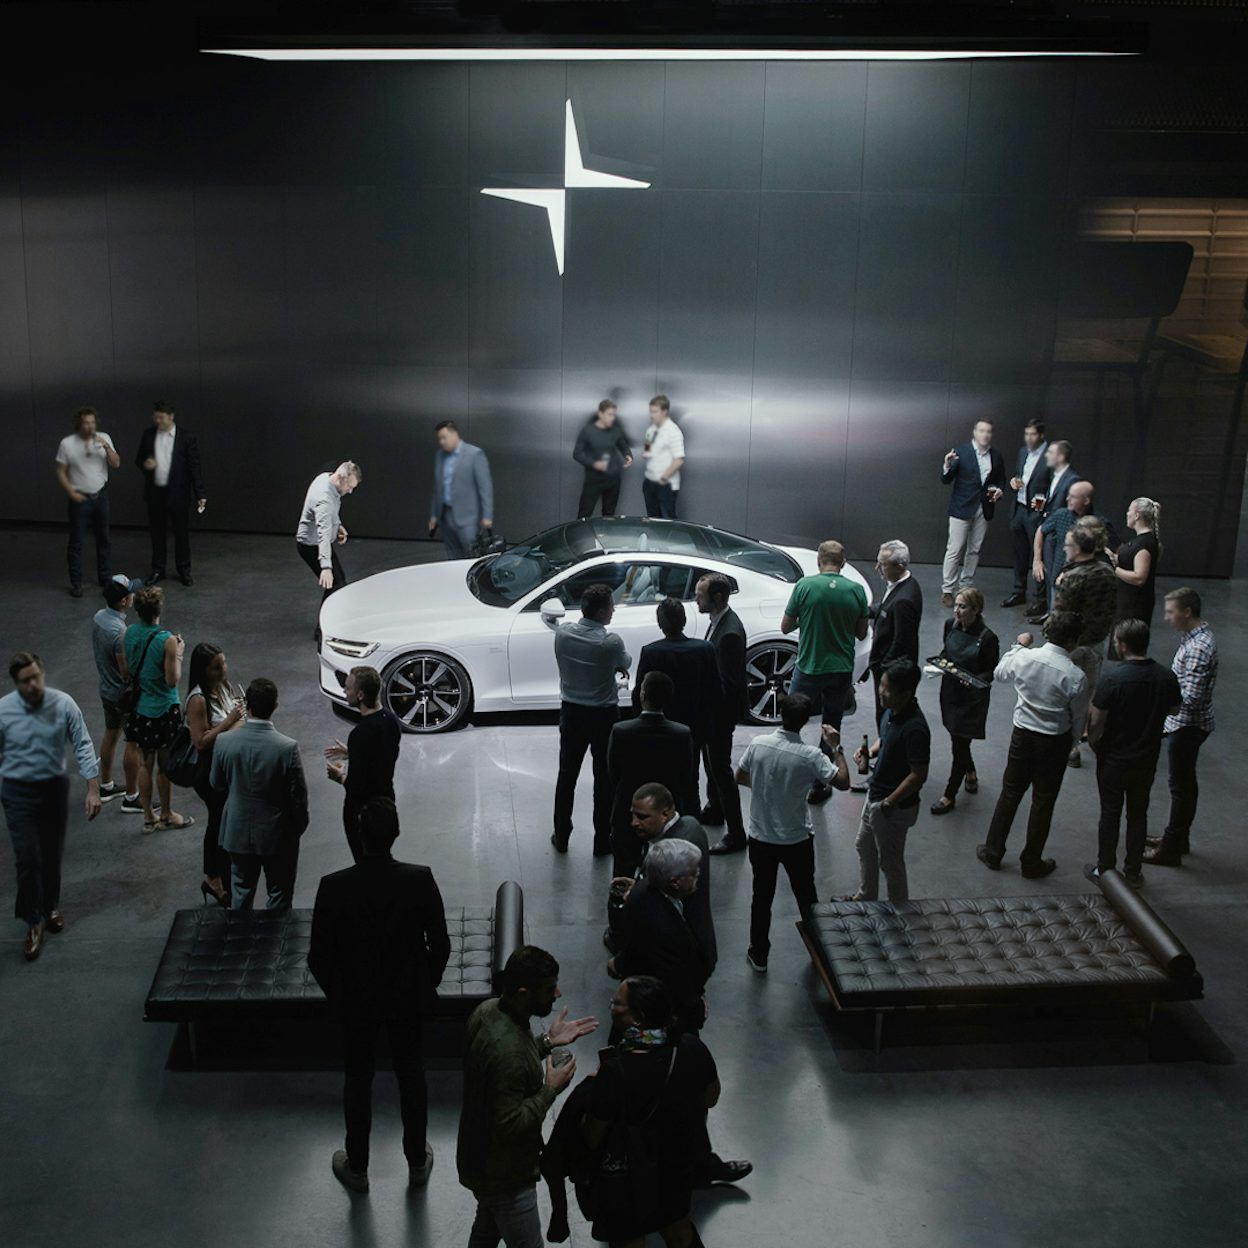 A crowd gathered around a white Polestar with the Polestar logo on a black wall in the background.